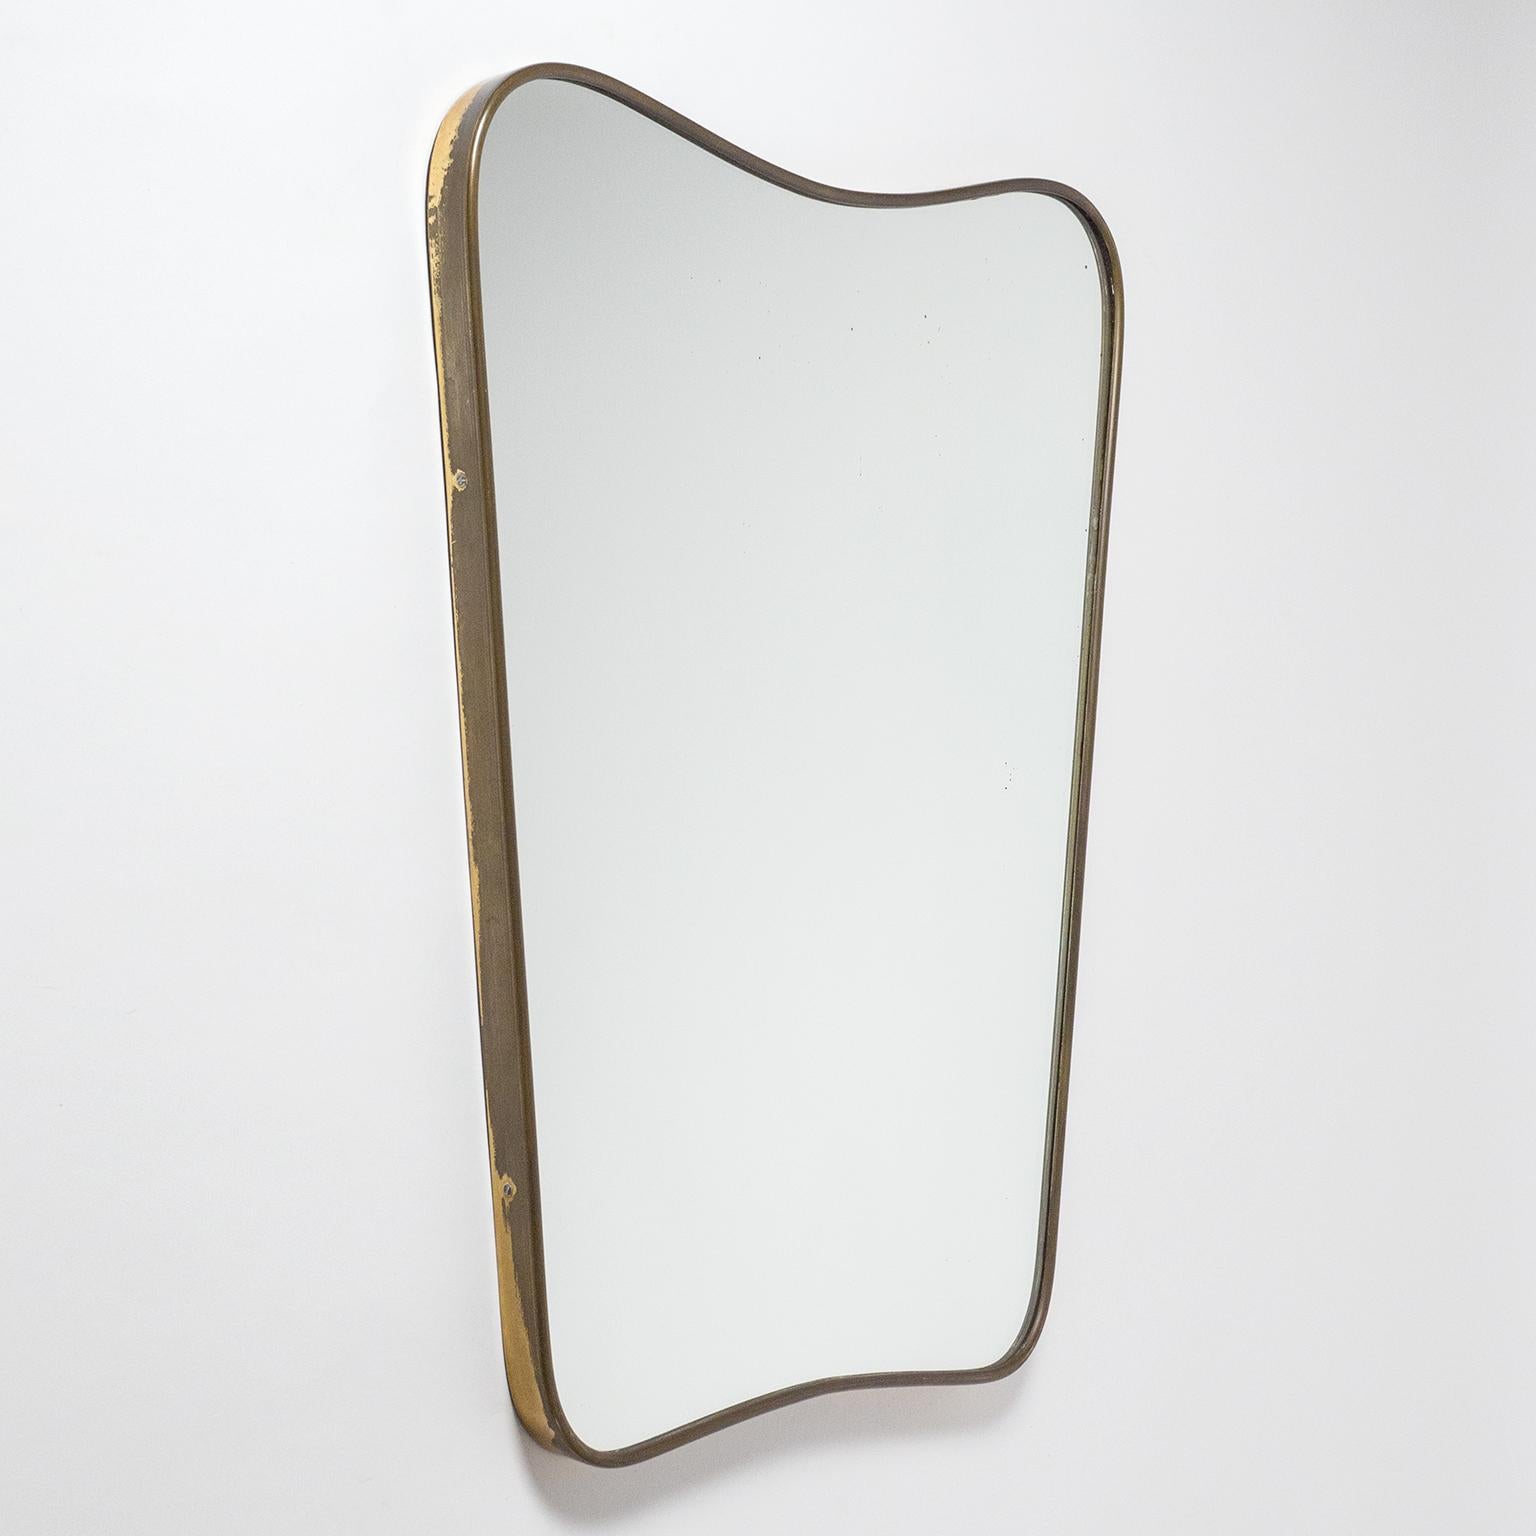 Fine Italian brass mirror in the style of Gio Ponti with a continuous, sensuously sculpted brass rim. Original condition with dark patina on the brass as well as some minor specks on the original mirror. Width on the bottom is 15.5inches/39cm.